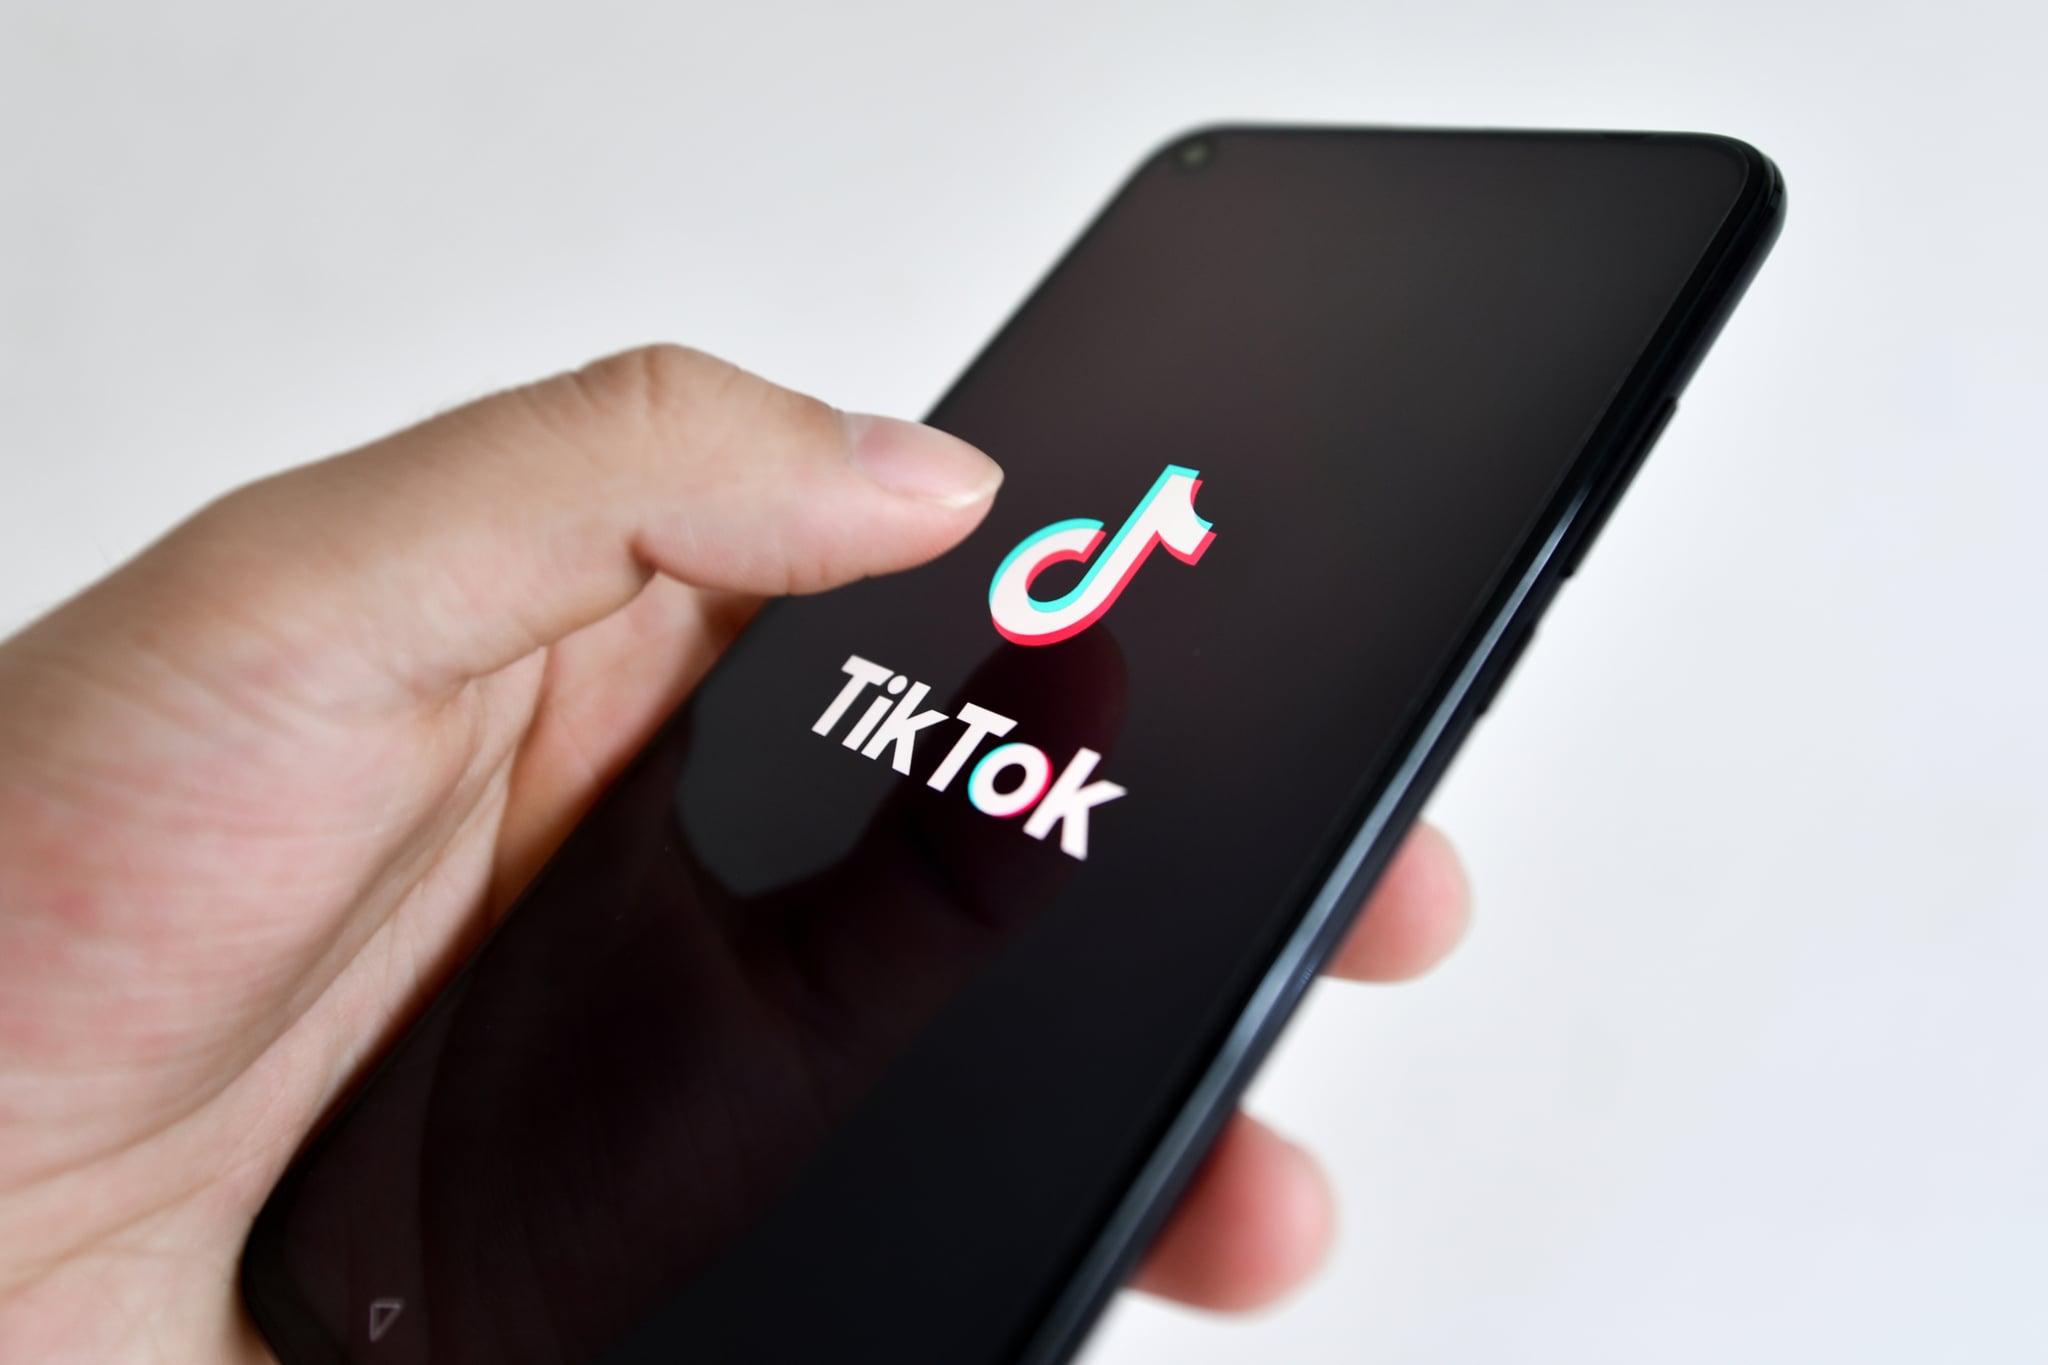 HAIKOU, CHINA - 2020/08/20: In this photo illustration, a TikTok logo seen displayed on a smartphone.The US' clampdown on TikTok along with President Donald Trump publicly favouring Oracle as the app's potential buyer are prompting concerns that the competitive landscape and innovation in the US tech industry will be harmed. (Photo Illustration by Sheldon Cooper/SOPA Images/LightRocket via Getty Images)